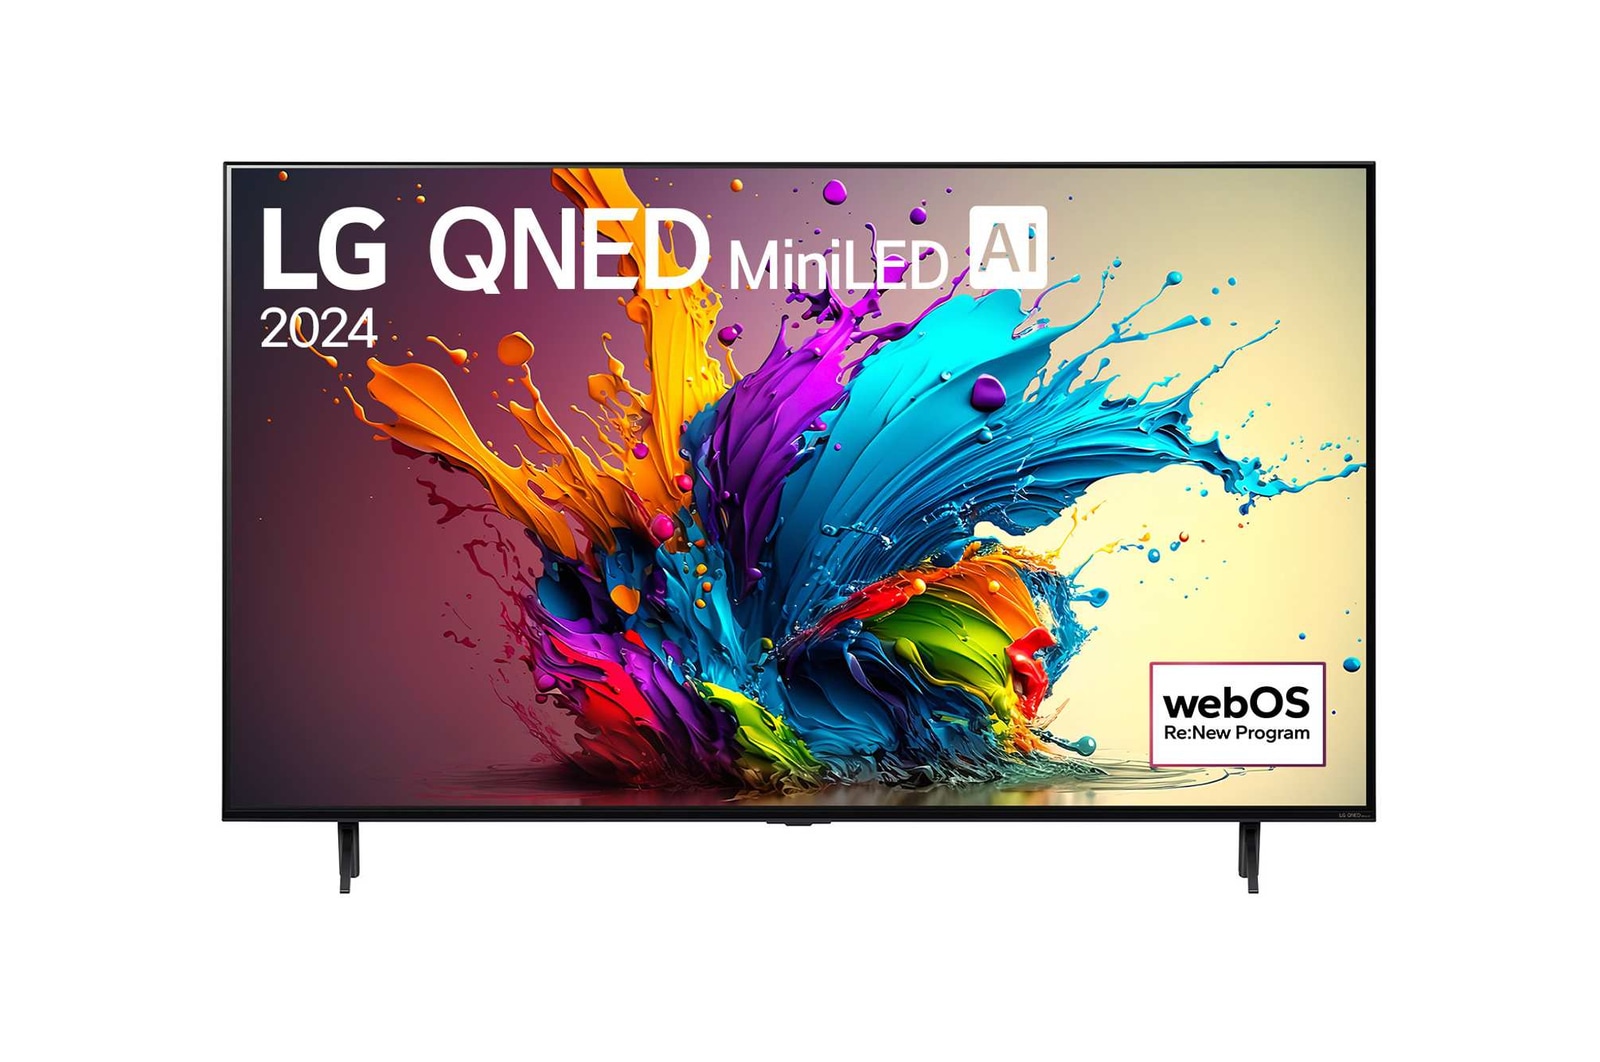 Front view of LG QNED TV, QNED90 with text of LG QNED MiniLED, 2024, and webOS Re:New Program logo on screen